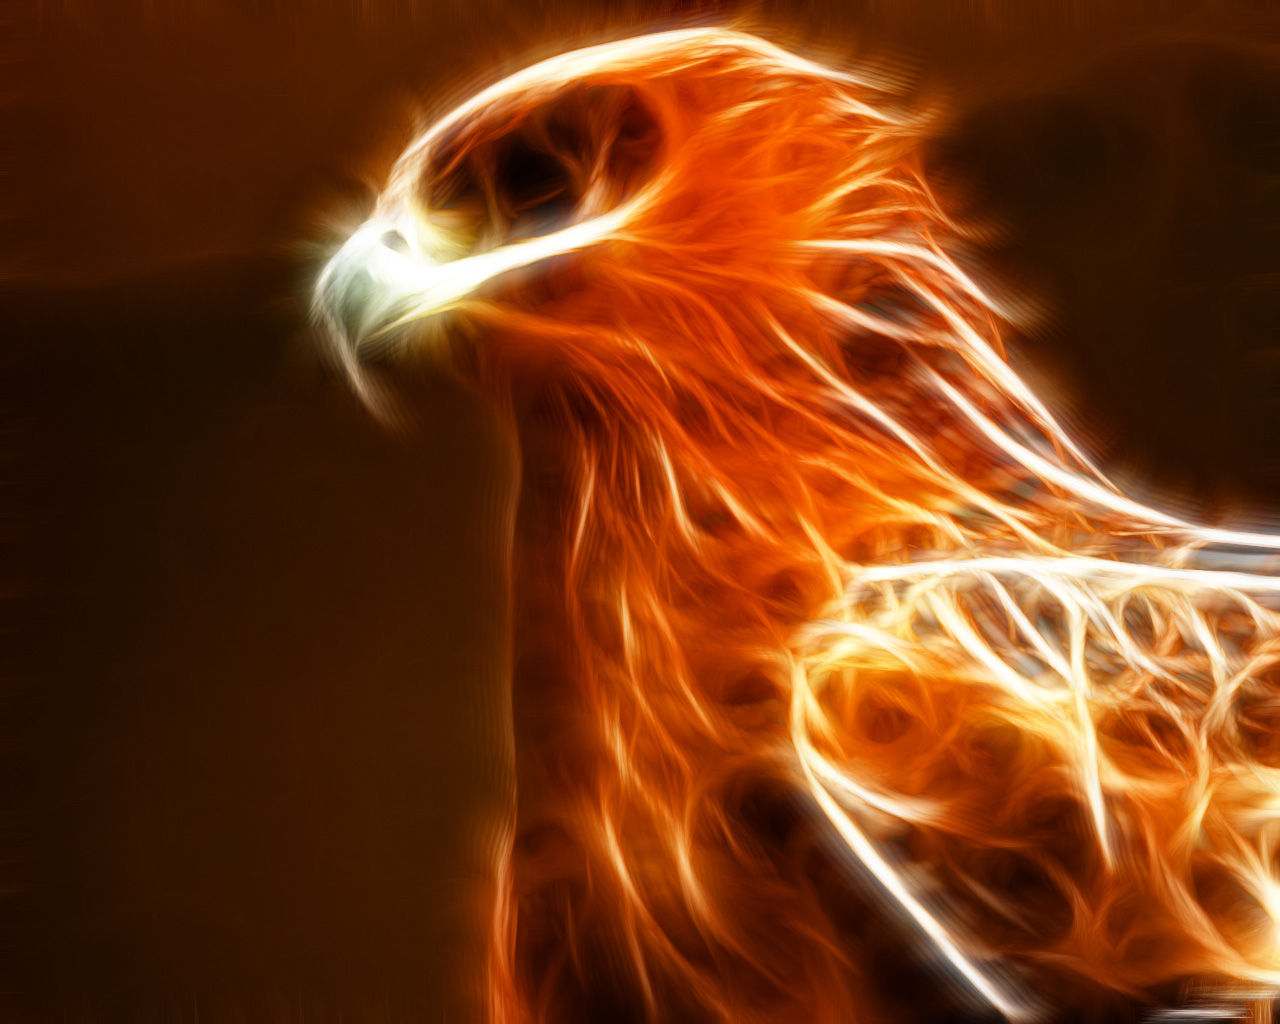 Phoenix In Hd Images And Wallpapers HD Wallpapers Download Free Map Images Wallpaper [wallpaper376.blogspot.com]